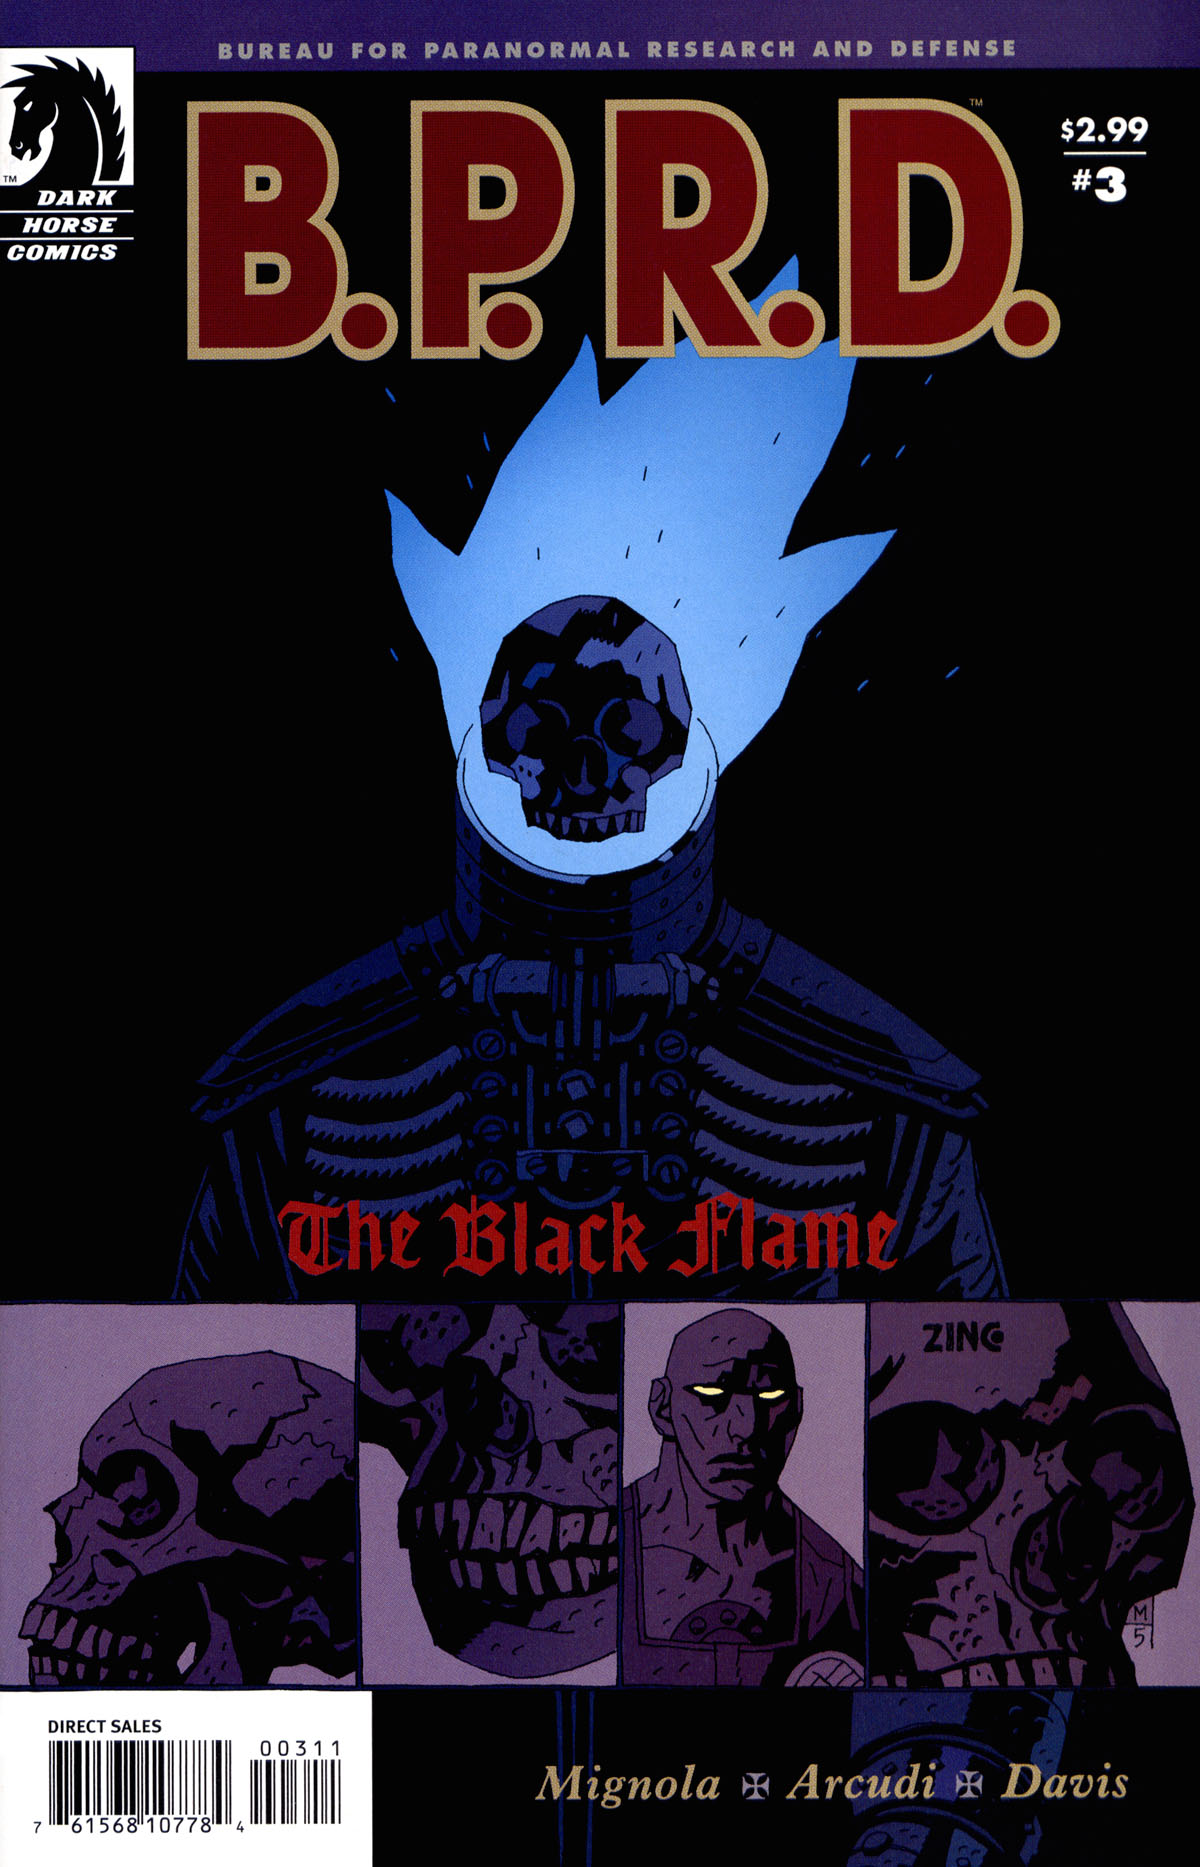 Amazing B.P.R.D.: The Black Flame Pictures & Backgrounds